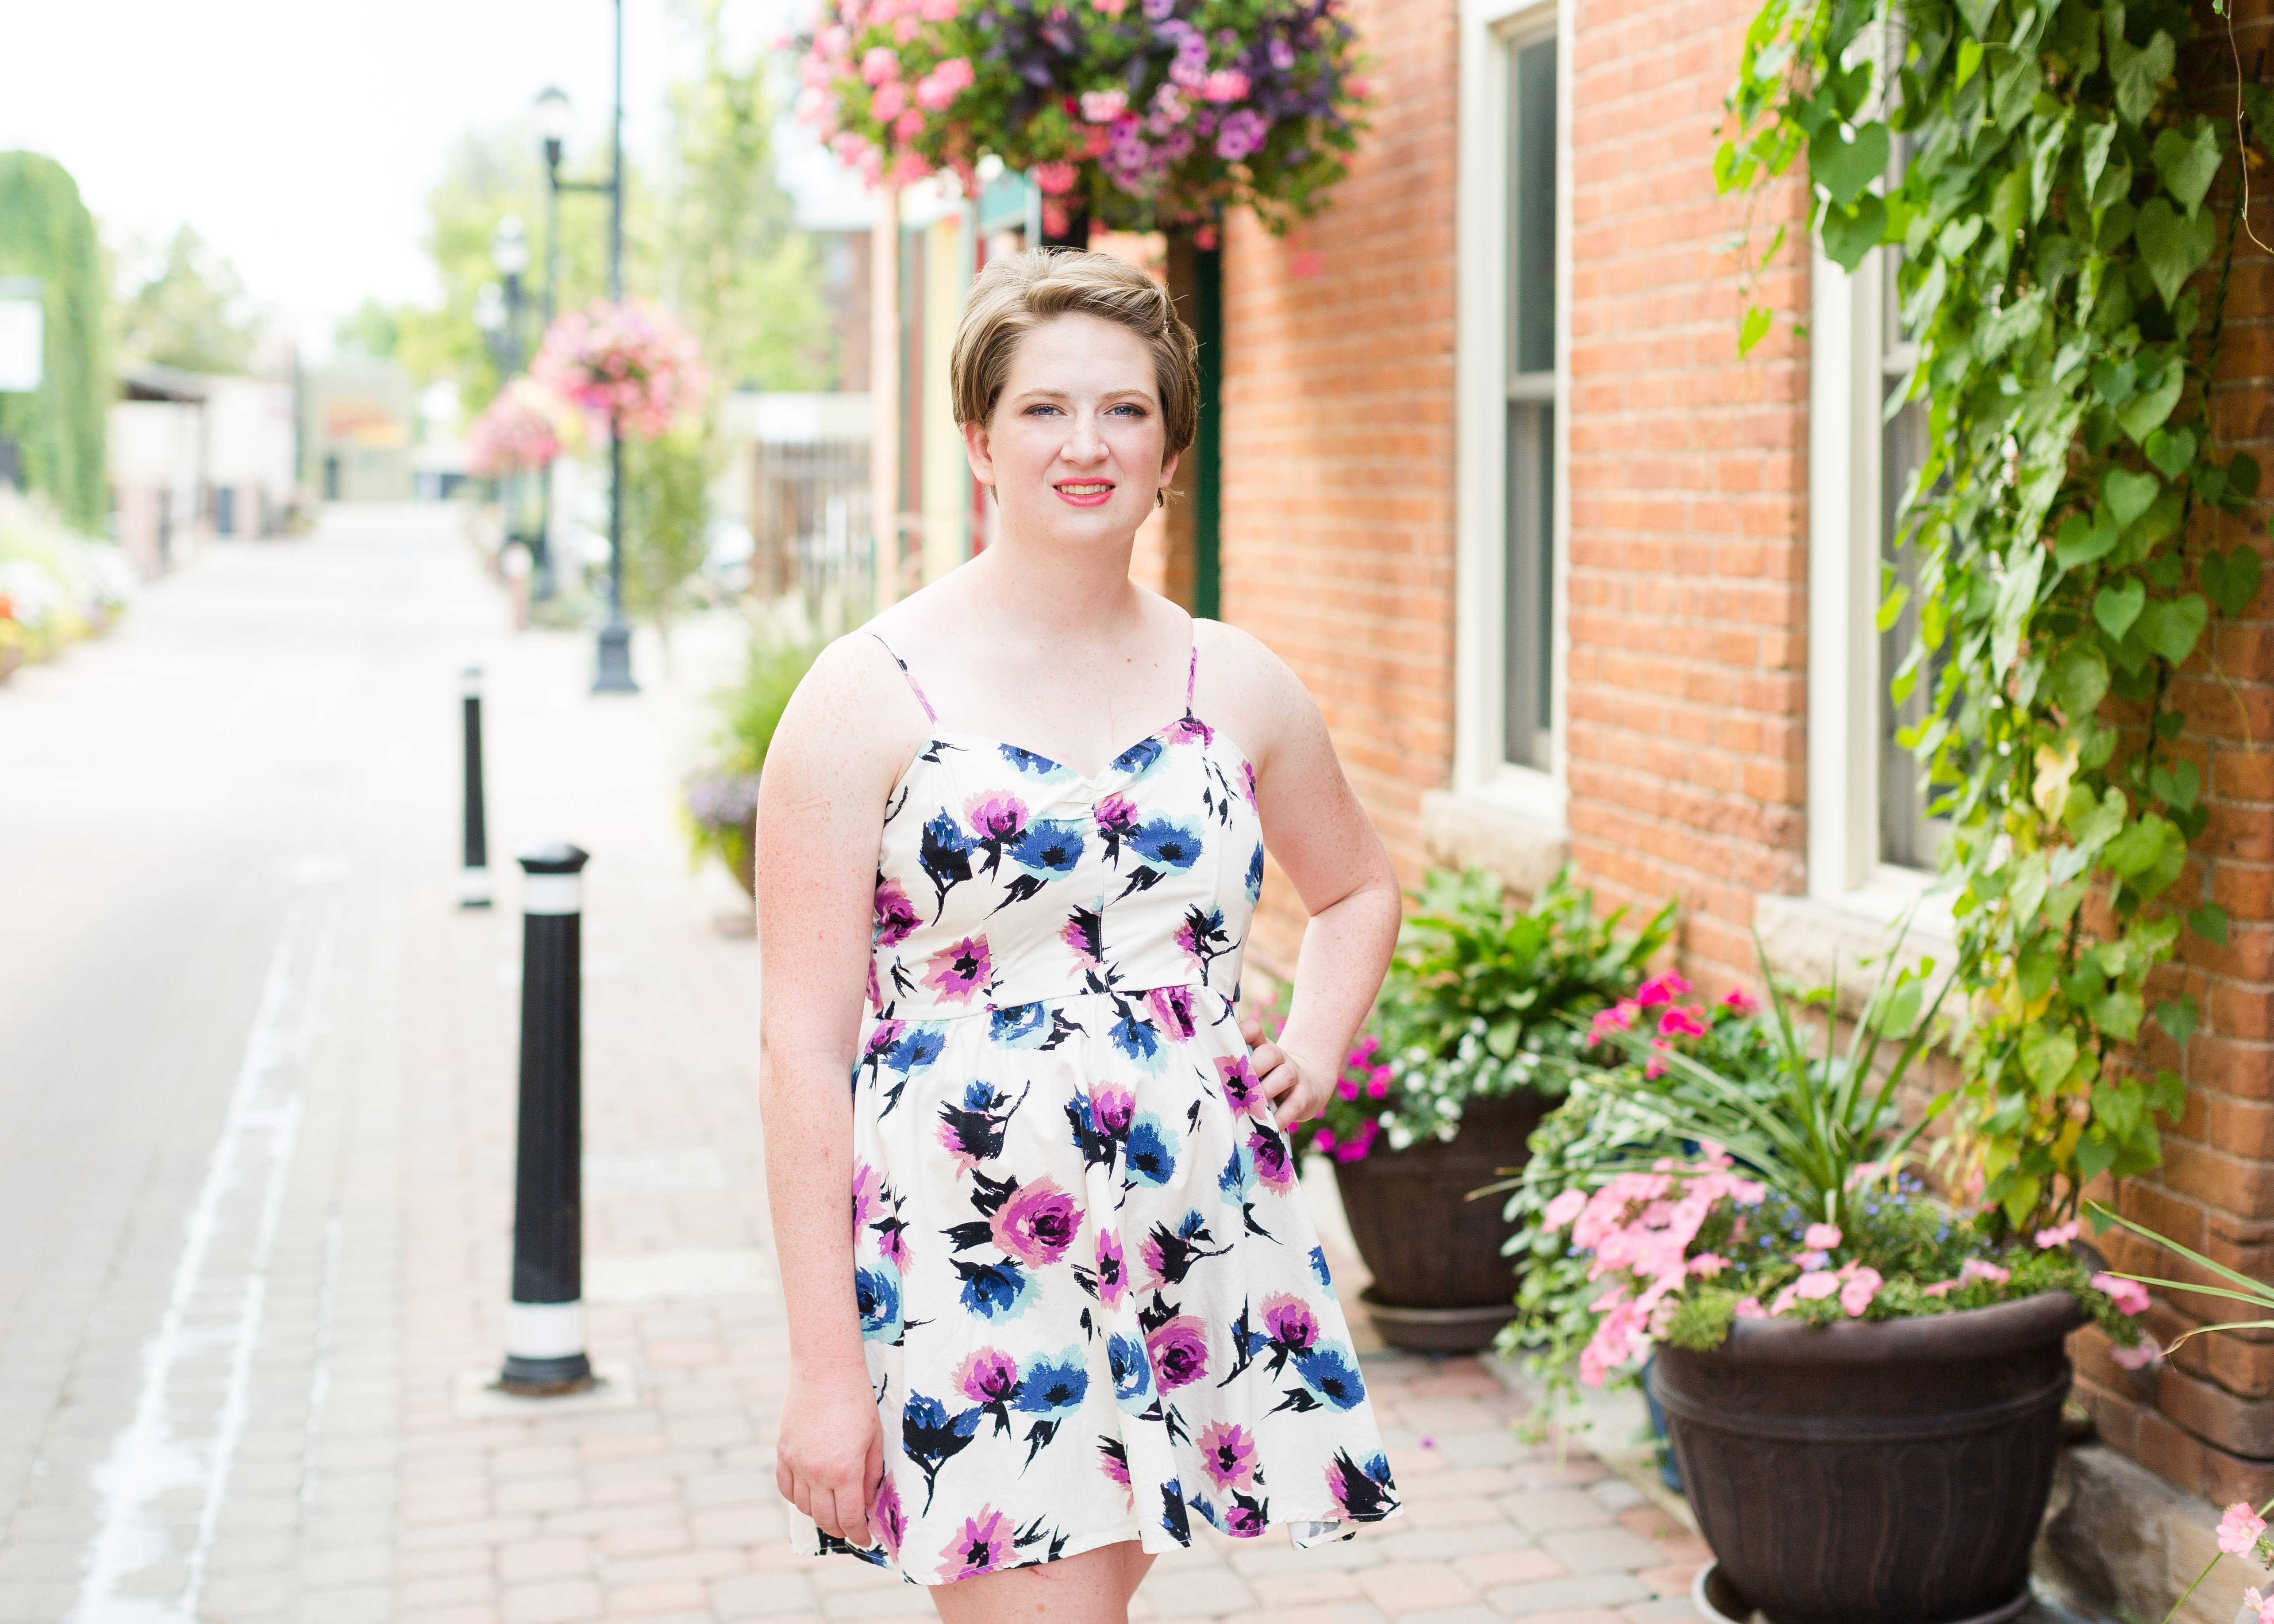 senior girl wearing white floral dress stands with her hand on her hip in an alley filled with flowers